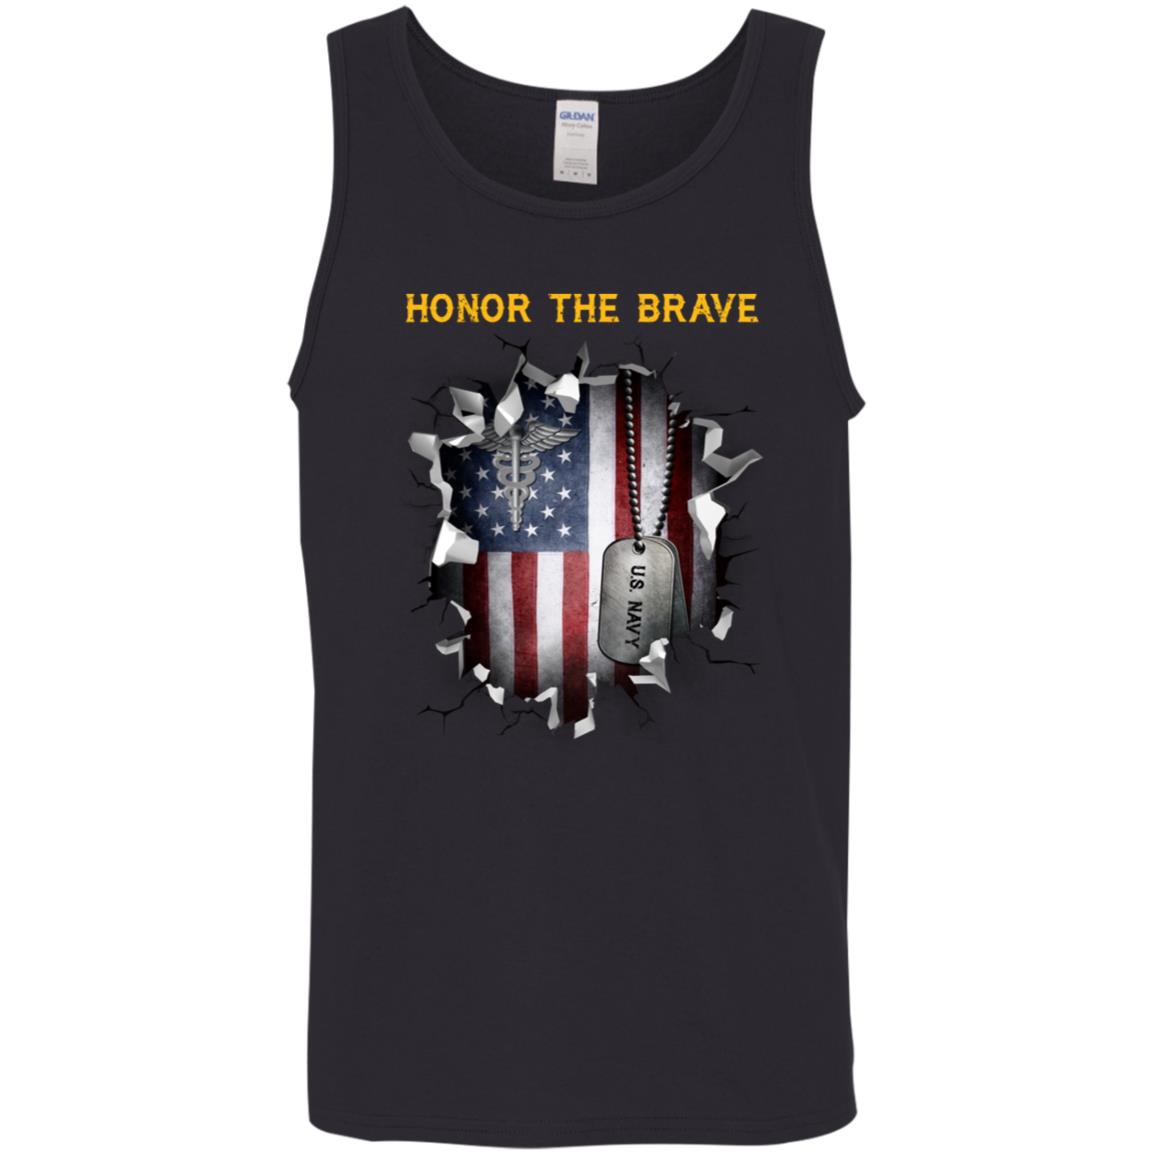 U.S Navy Hospital Corpsman Navy HM - Honor The Brave Front Shirt